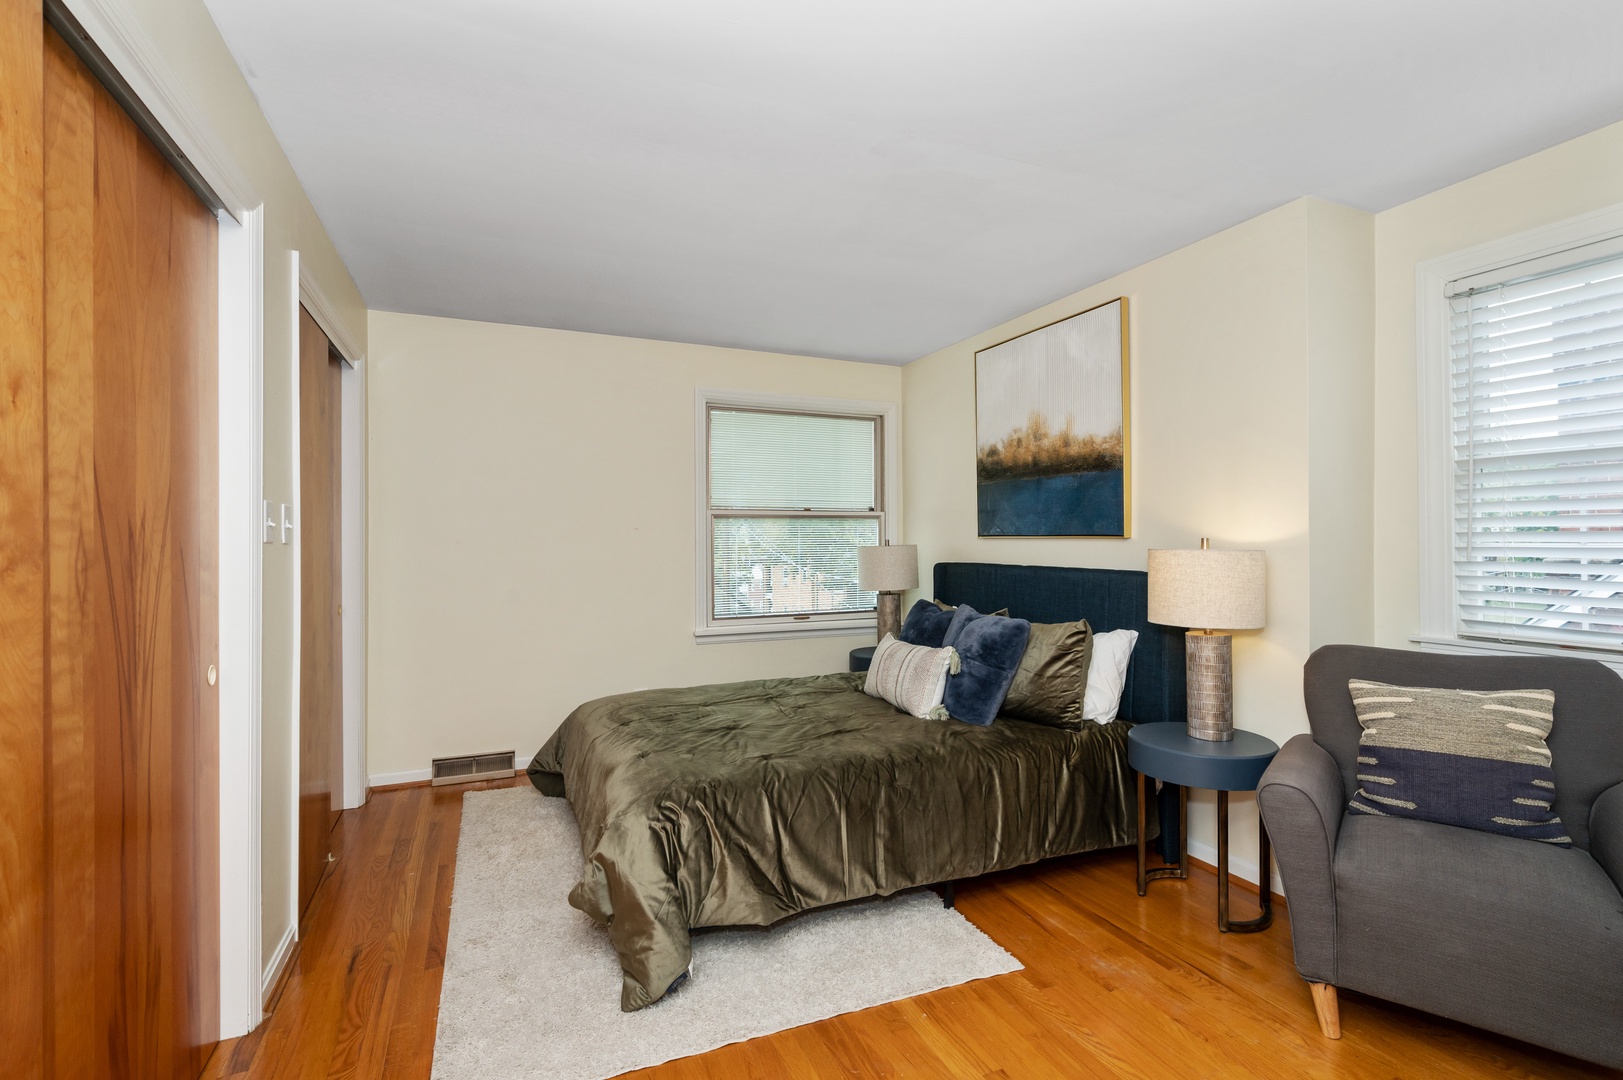 This 2nd floor bedroom offers a queen bed, desk workspace, & chic sitting area